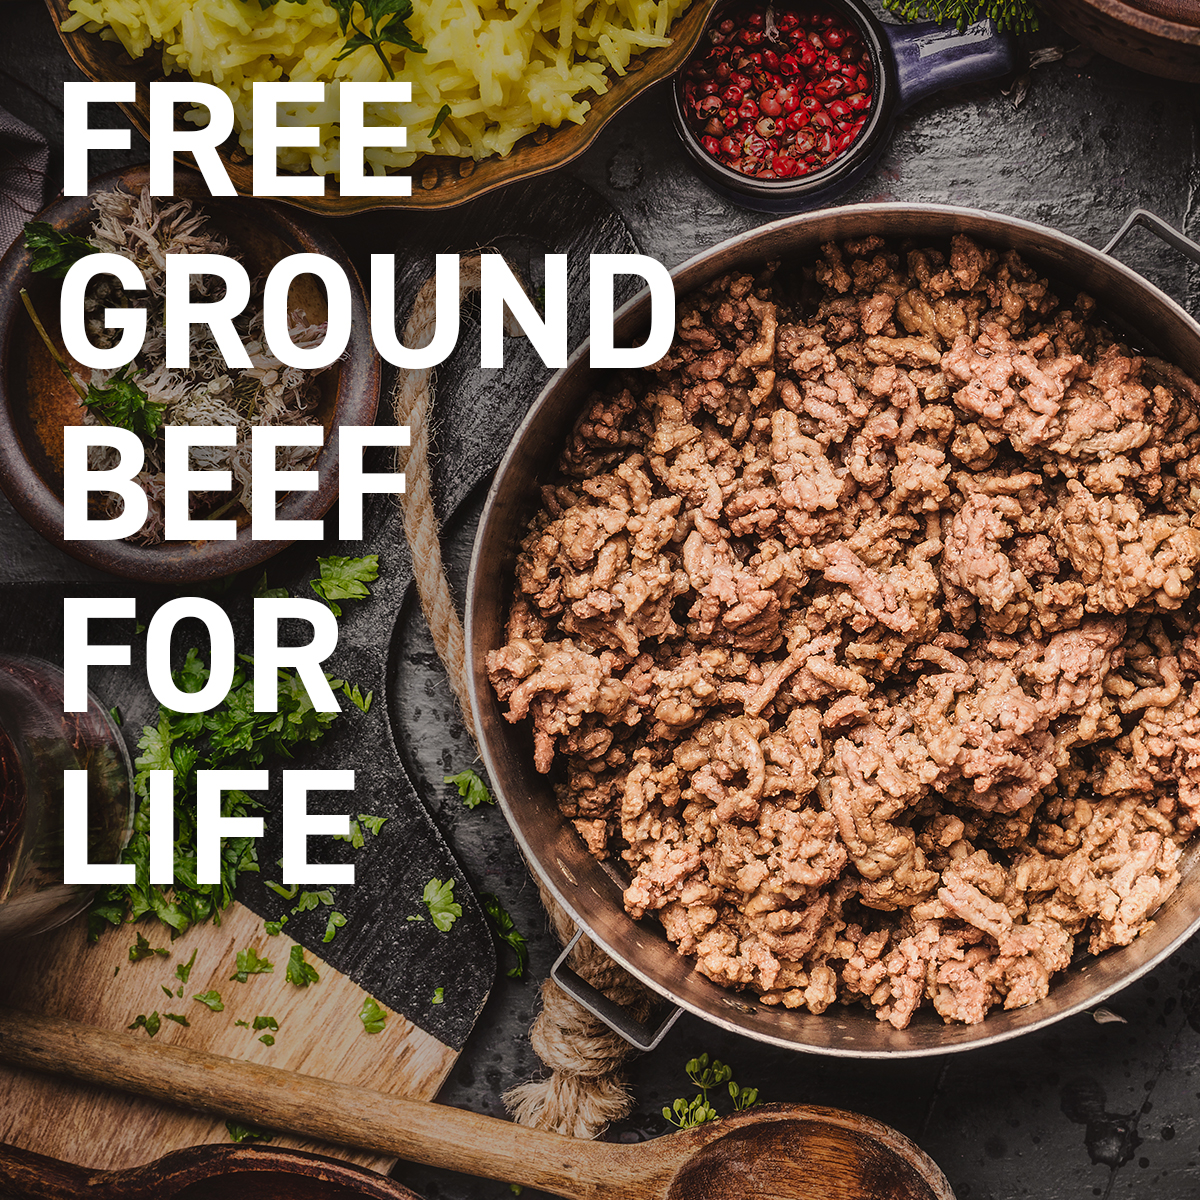 It's Almost Cookout Season. Enjoy Free Ground Beef For Life!